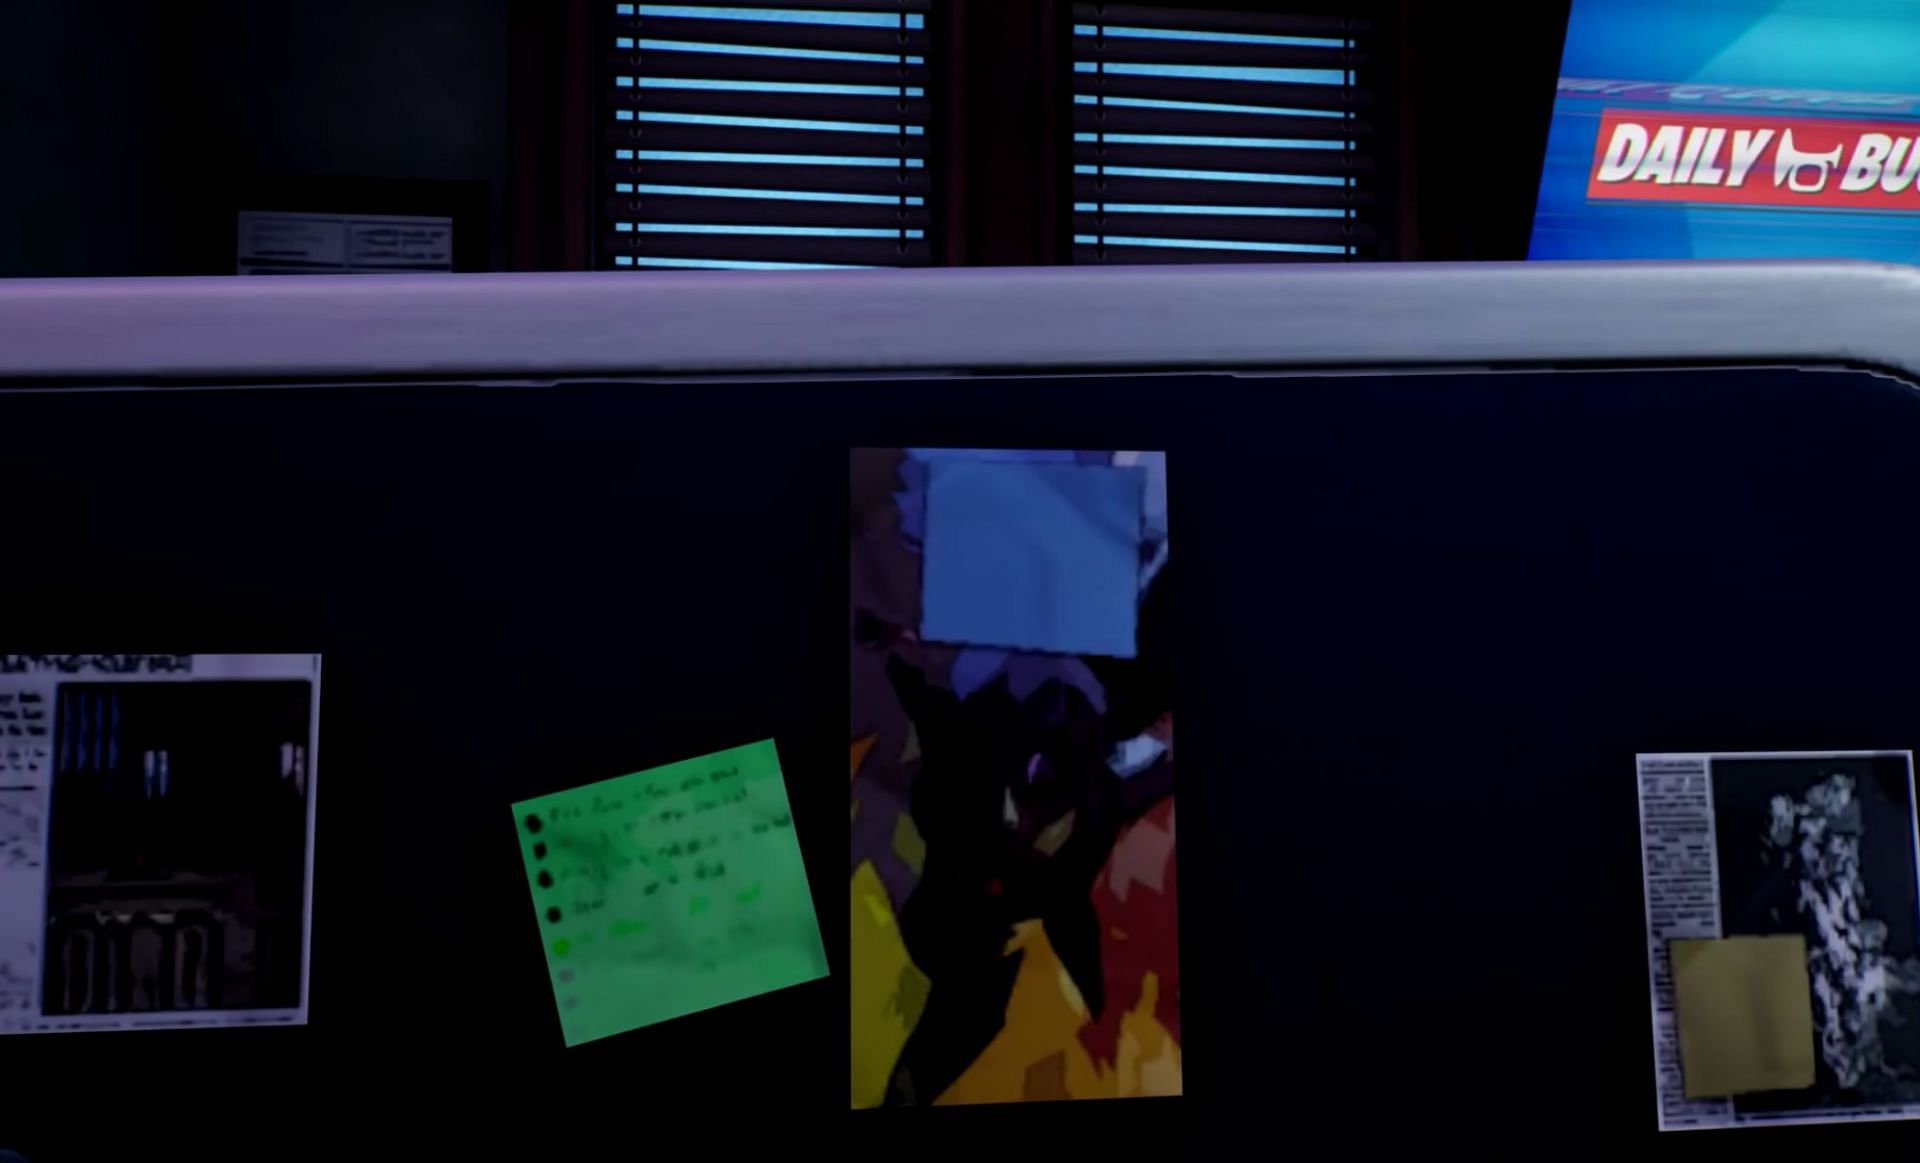 Miles Morales image found at the Daily Bugle (Image via TaborHill on YouTube)